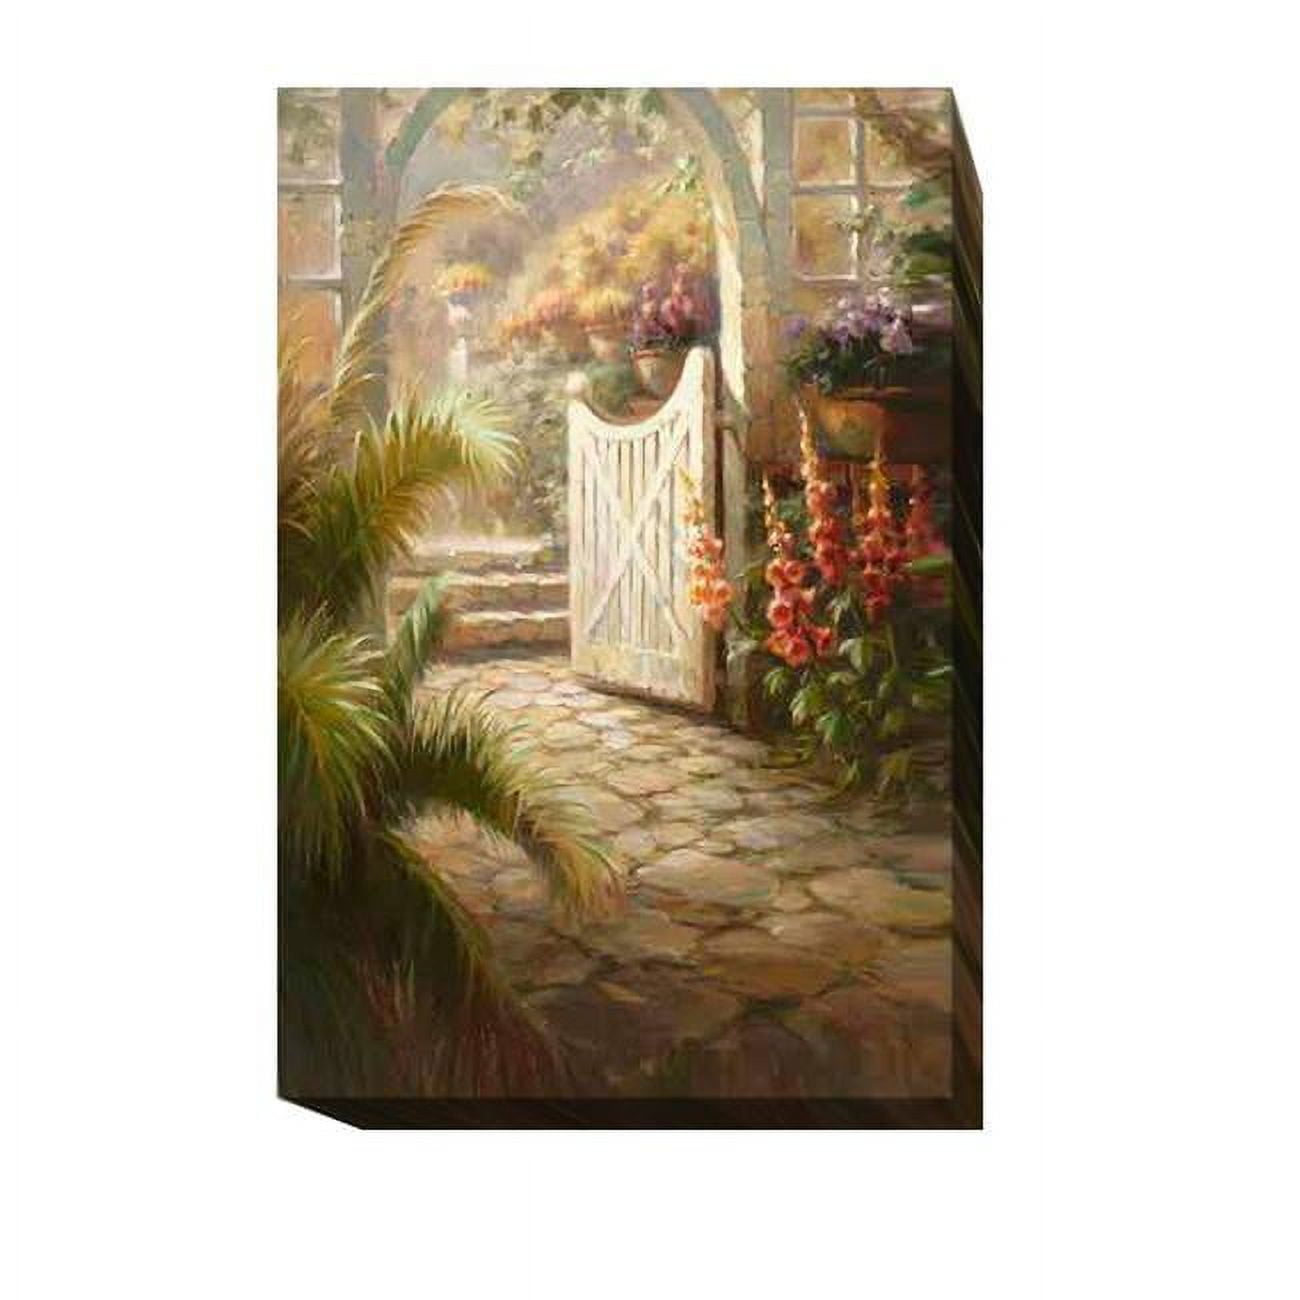 2436g533eg Morning In The Garden By Roberto Lombardi Premium Gallery-wrapped Canvas Giclee Art - Ready To Hang, 24 X 36 X 1.5 In.